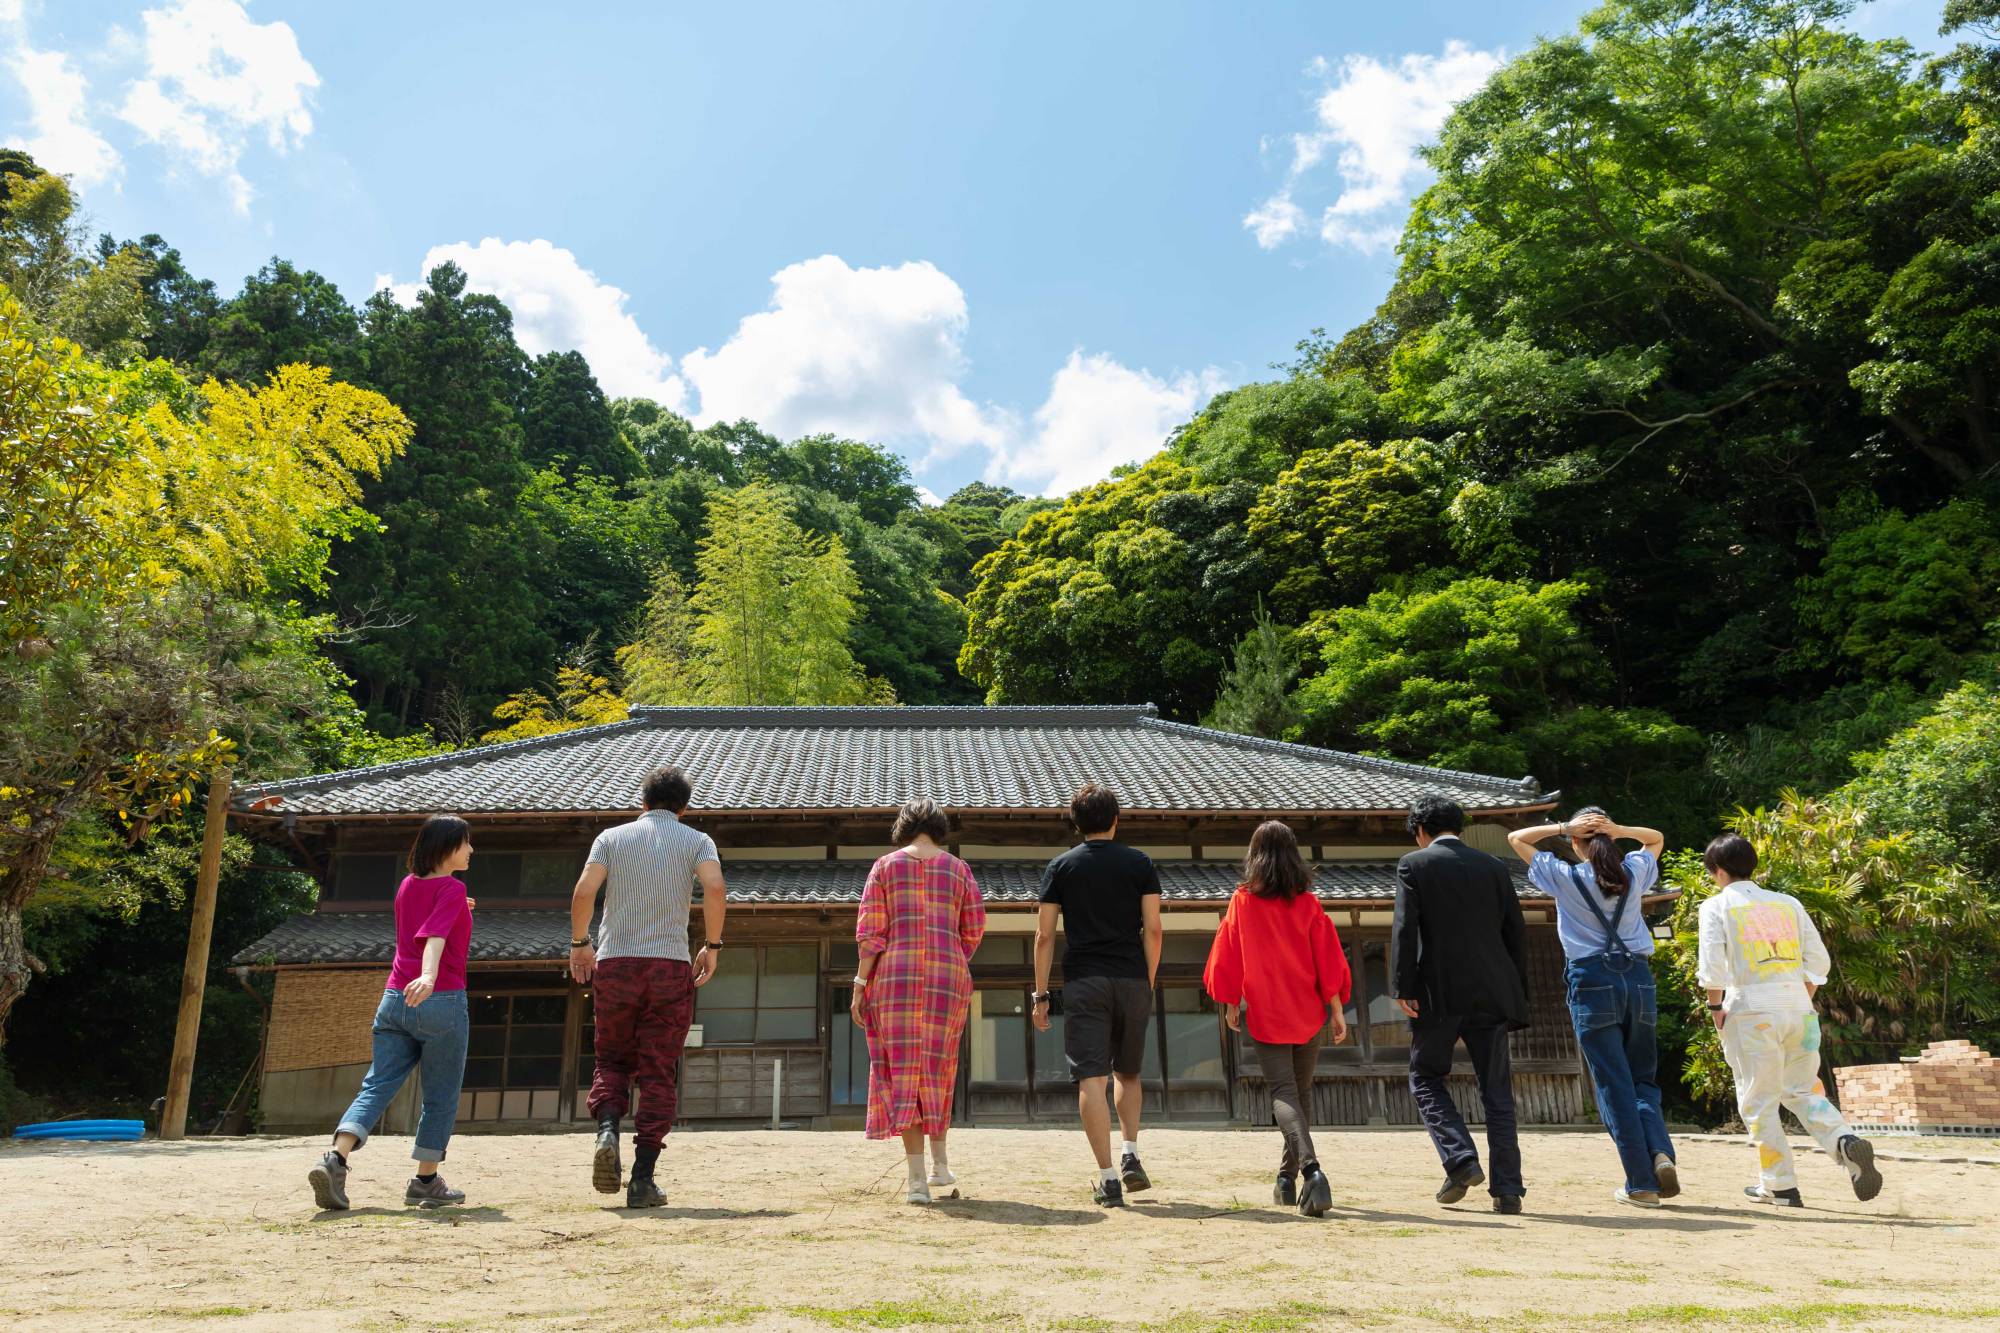 Netflix Japan’s new dating show “Love Village” gathers a handful of singles aged 35 and above at a ramshackle house in the Japanese countryside. Reliably, hijinks ensue.  | COURTESY OF NETFLIX